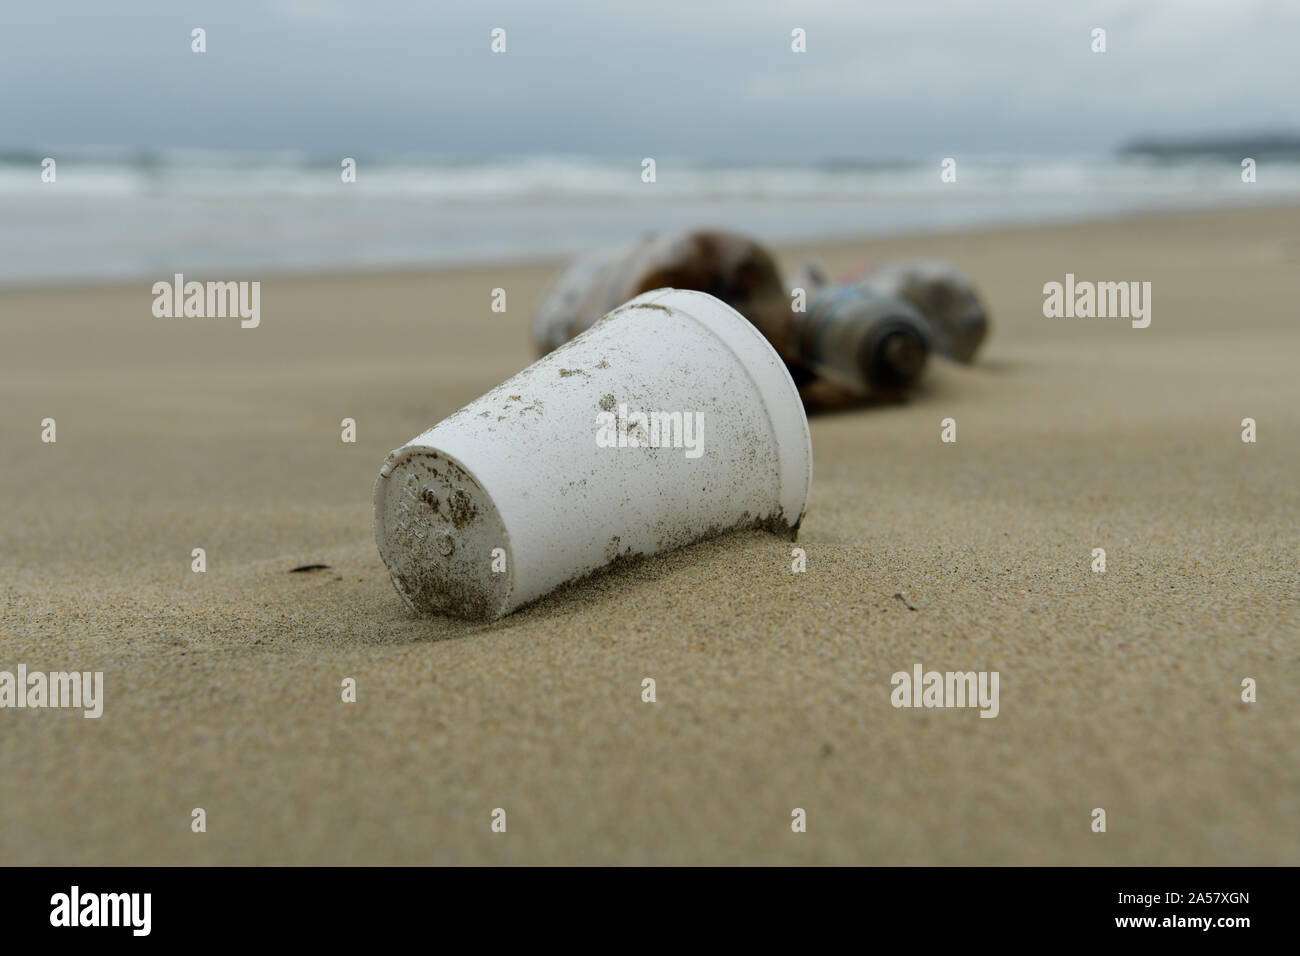 https://c8.alamy.com/comp/2A57XGN/white-polystyrene-disposable-take-out-drinking-cup-washed-up-on-beach-plastic-pollution-objects-close-up-background-in-situ-durban-south-africa-2A57XGN.jpg